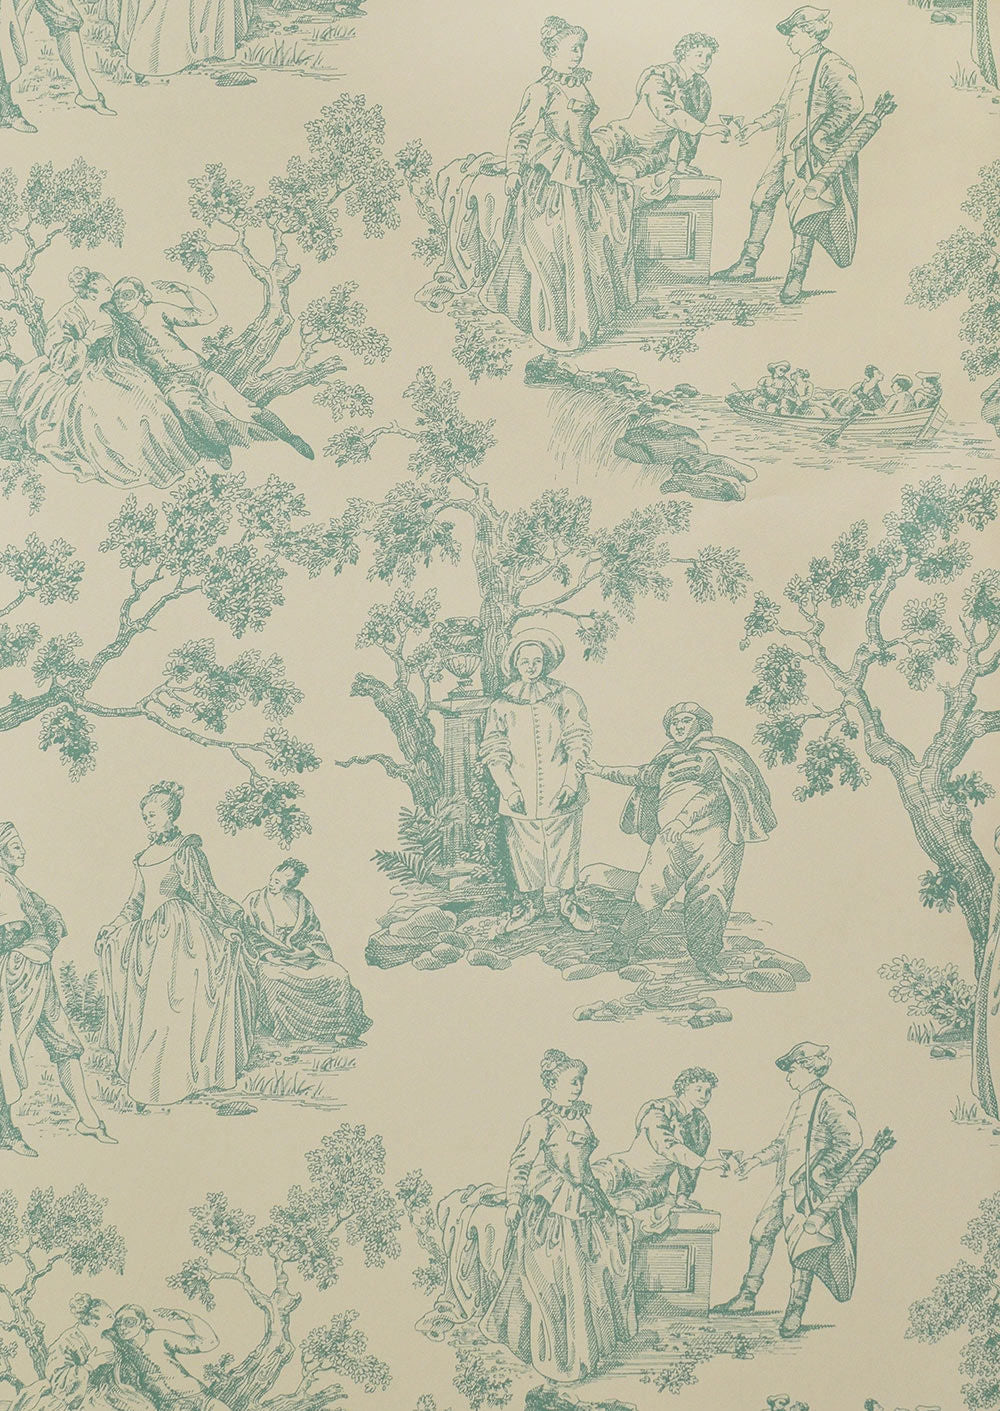 Vauxhall Gardens Fabric - Teal - Lewis & Wood